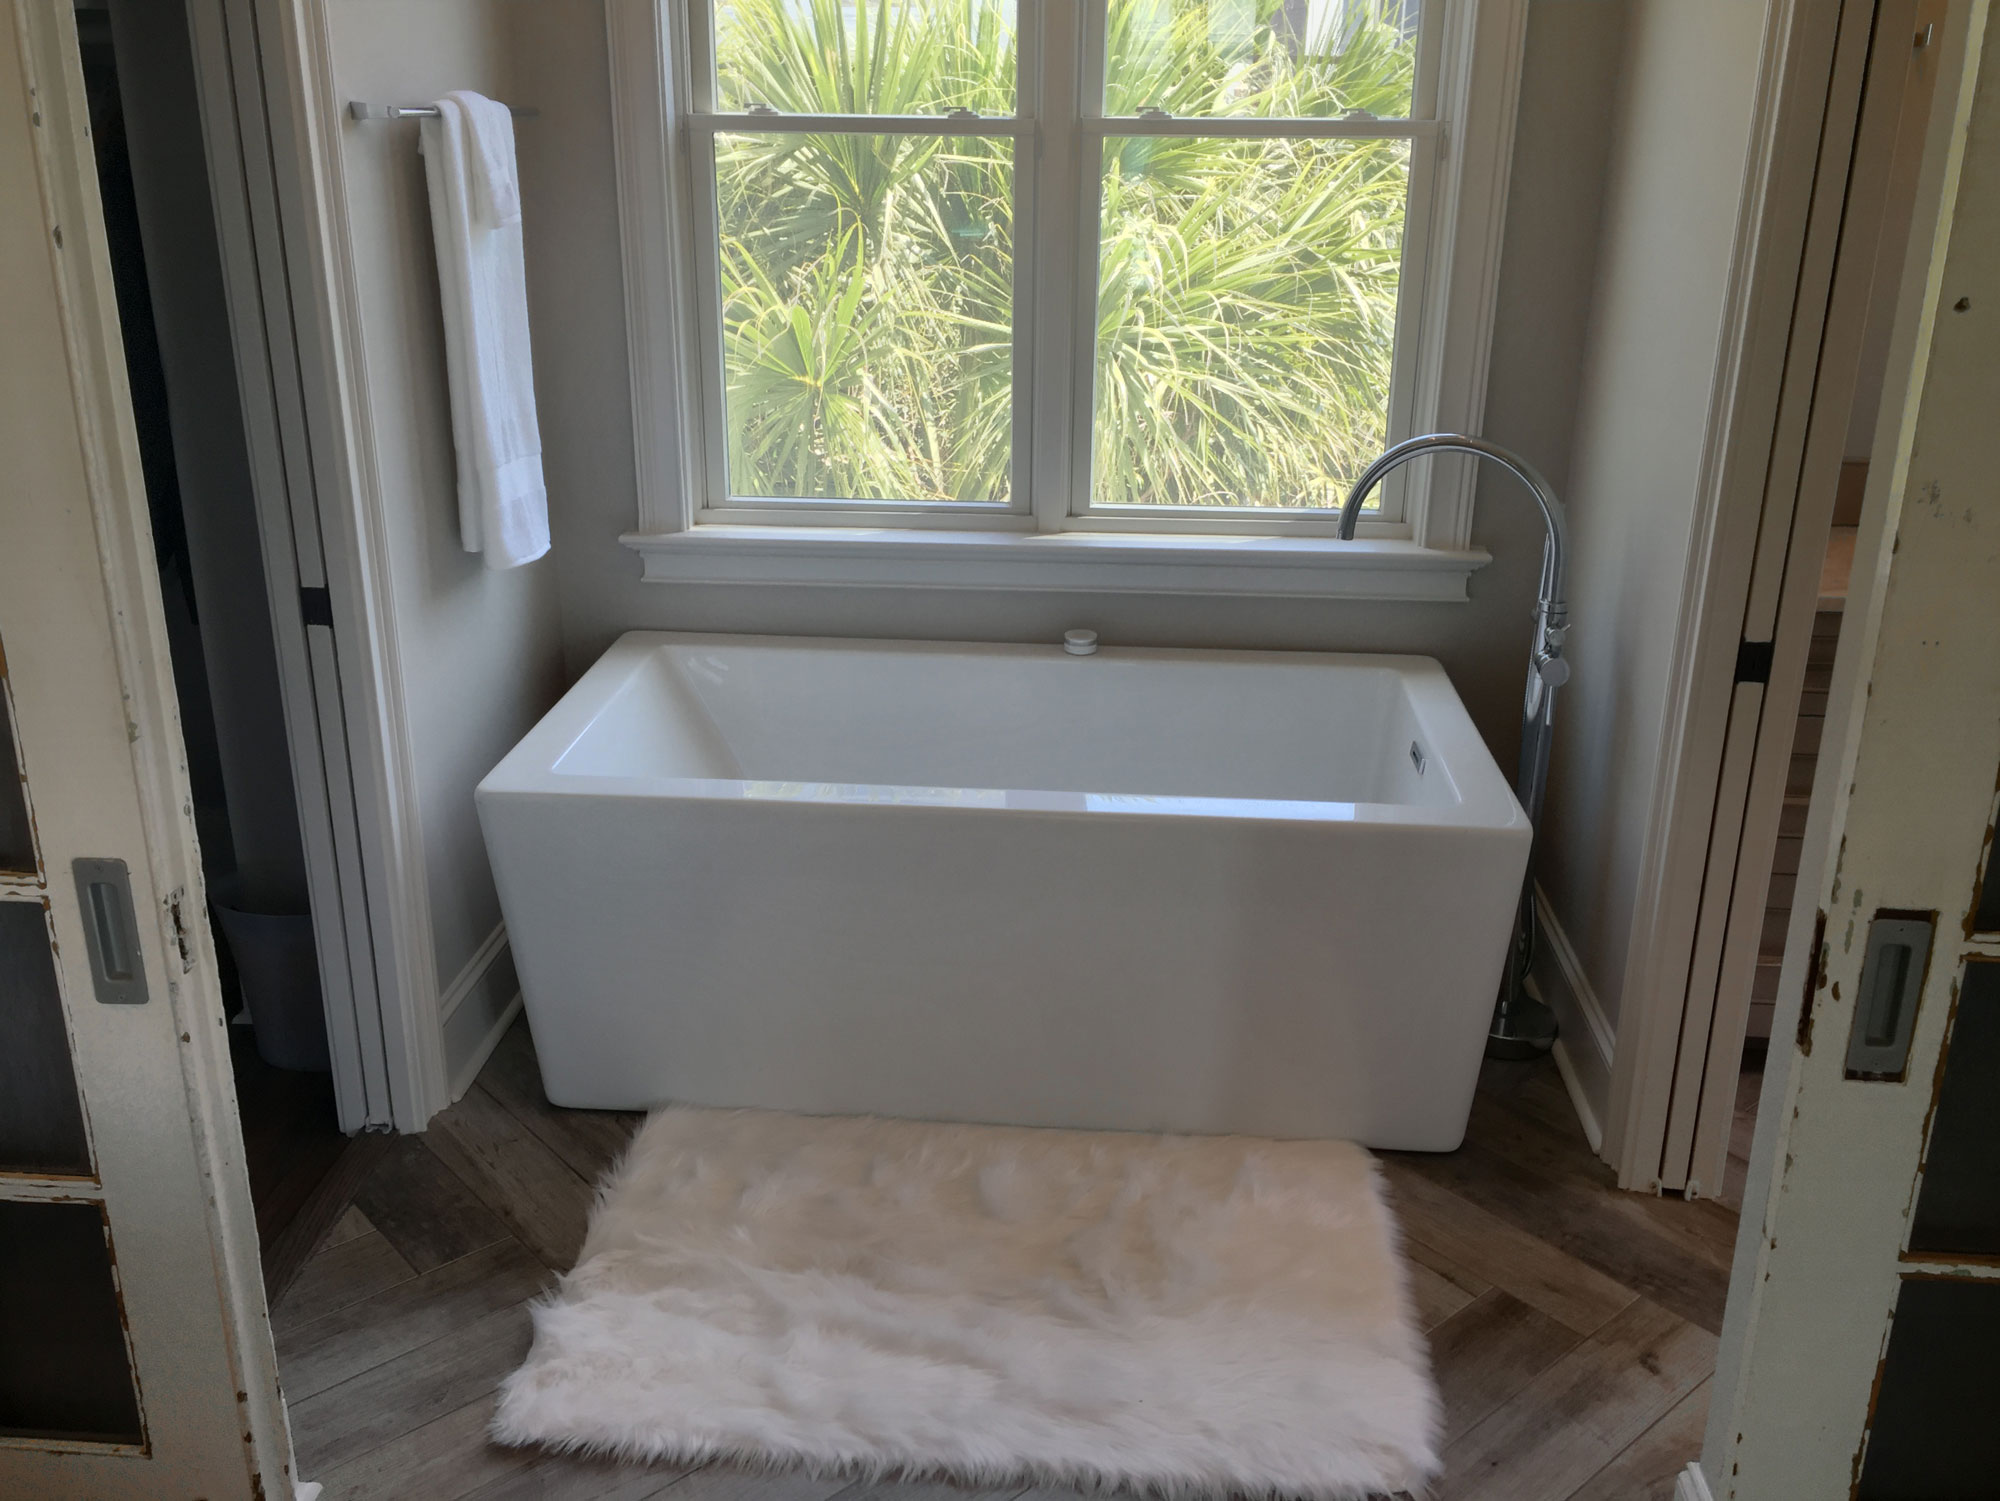 5 piece bathroom with seperate space for soaking tub